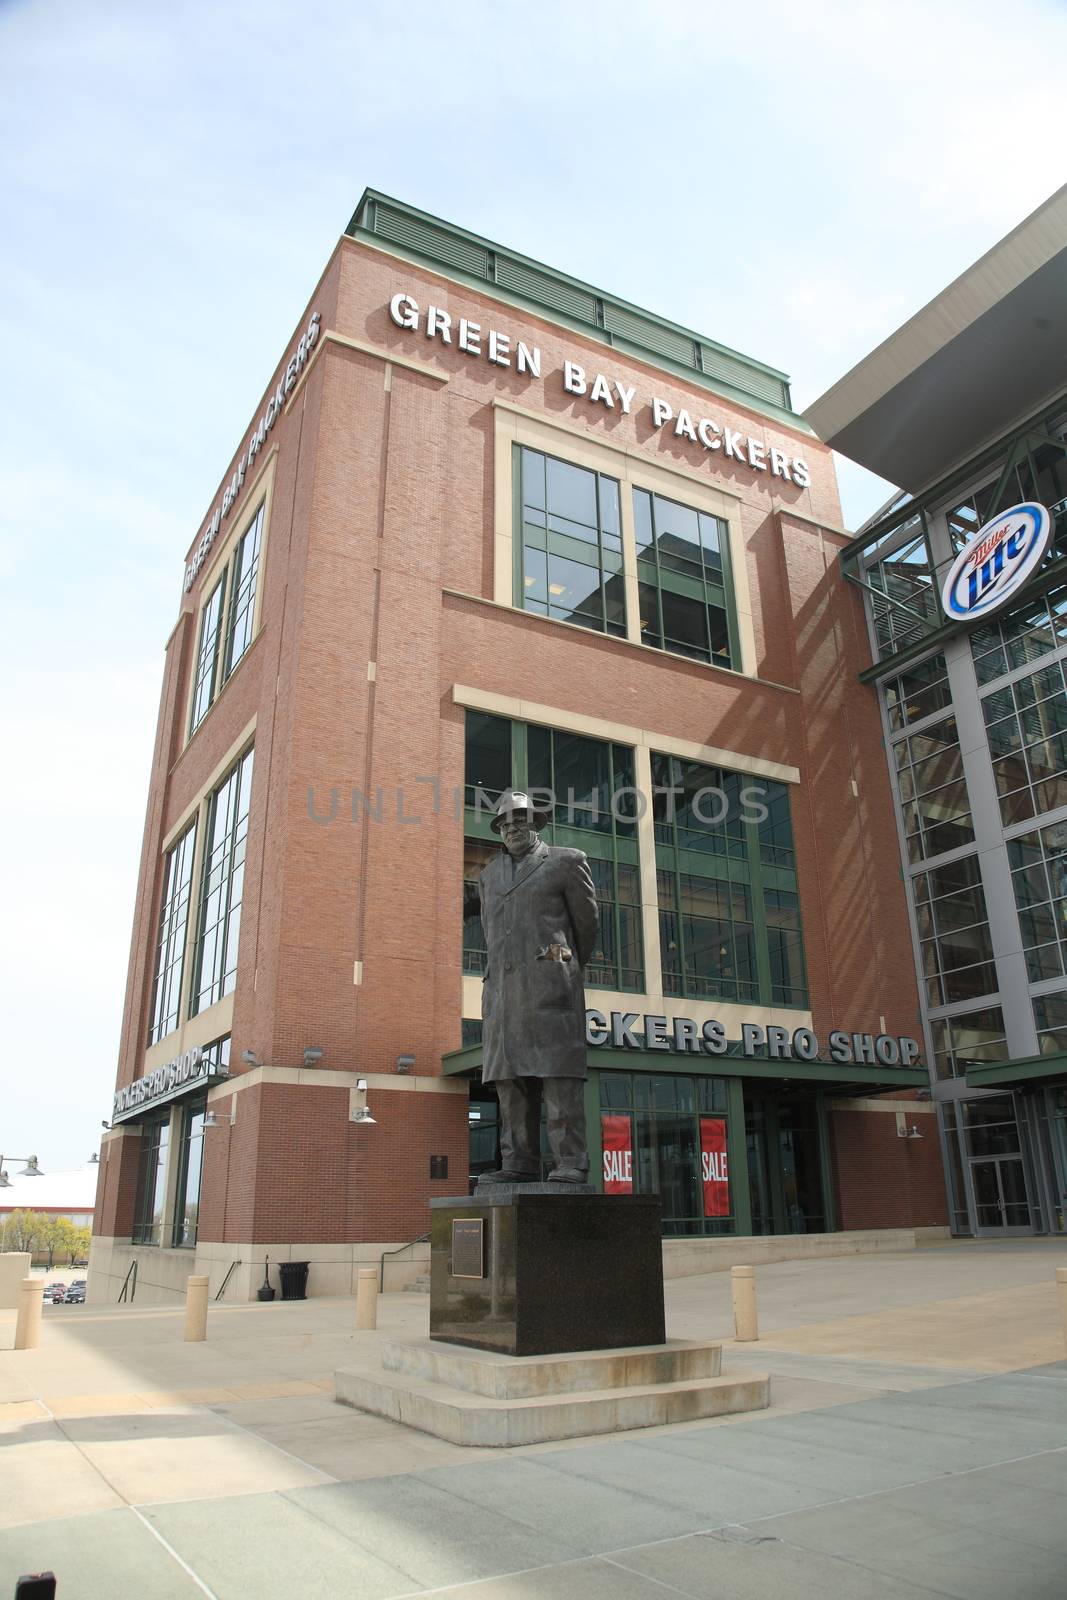 Vince Lombardi statue at historic Lambeau Field in Wisconsin. The Packers NFL stadium is sometimes referred to as the Frozen Tundra.